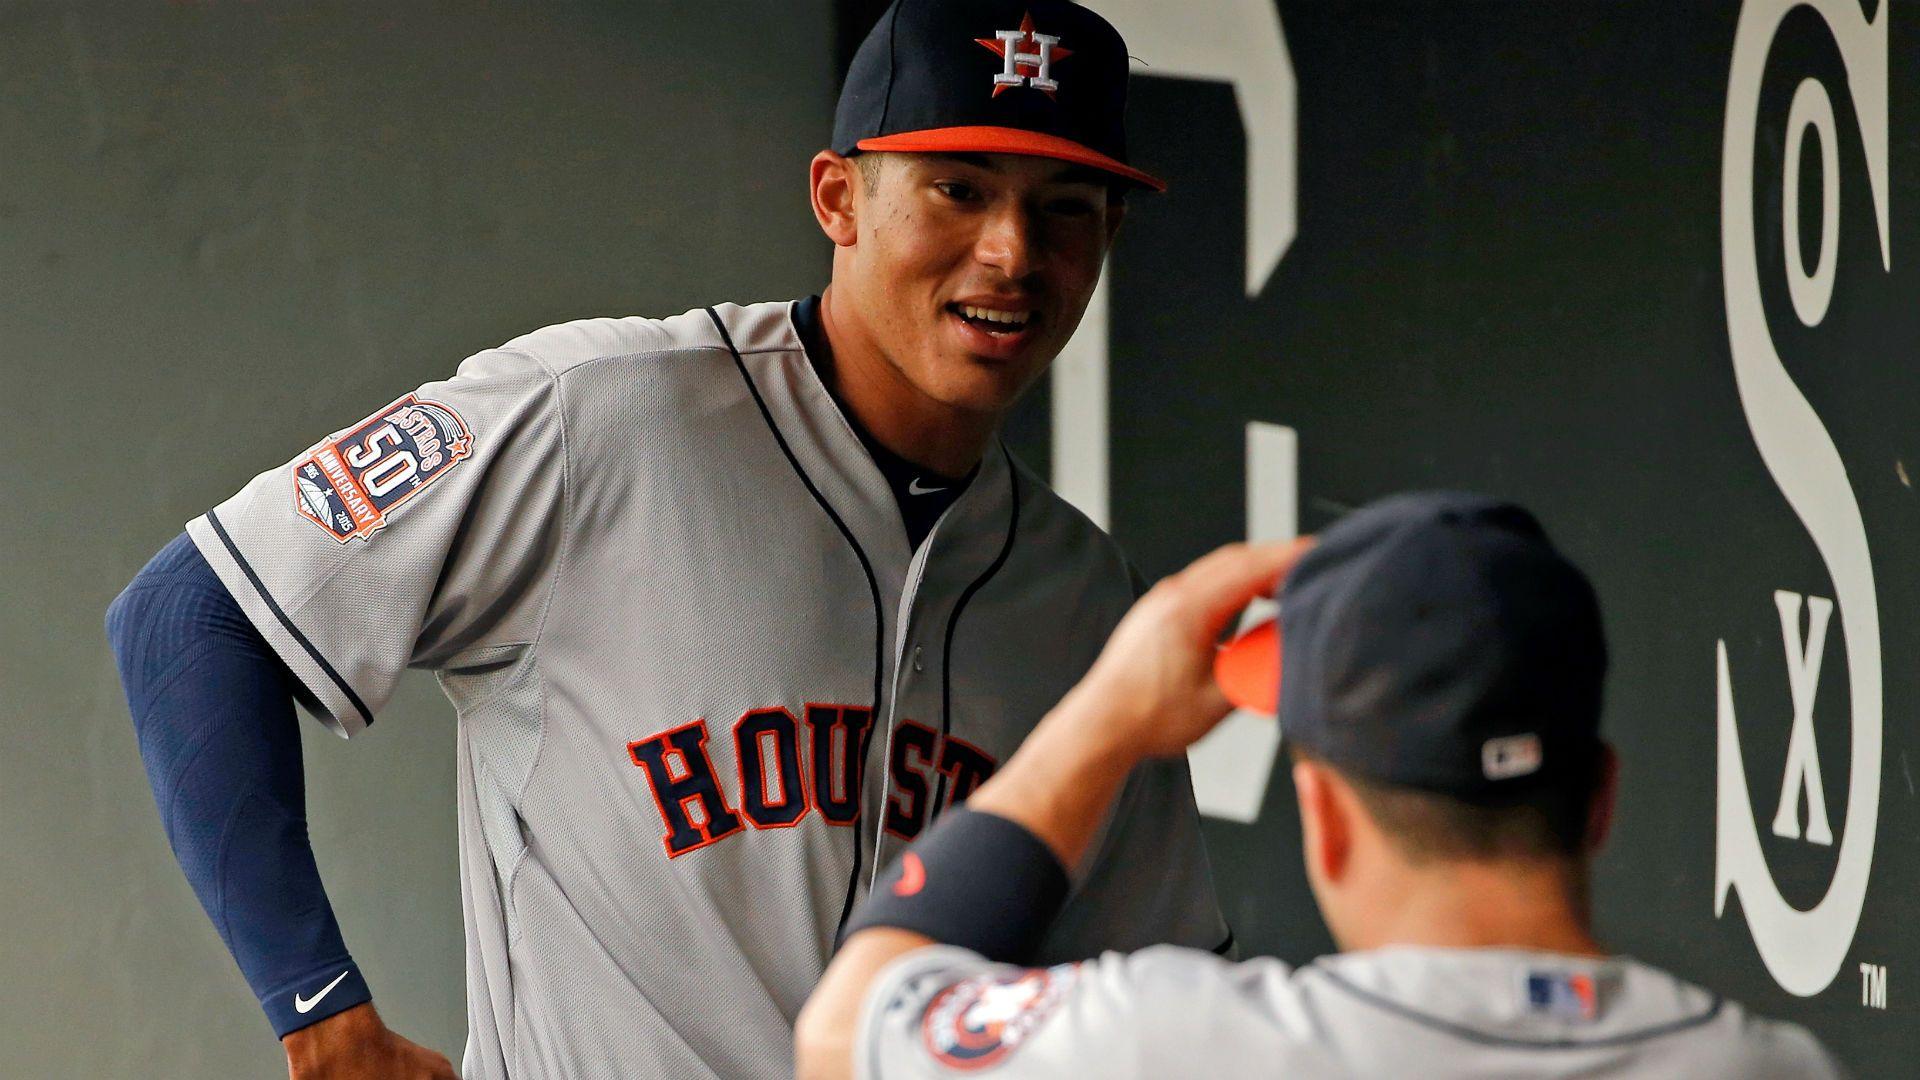 Carlos Correa gets first MLB hit with an assist from replay